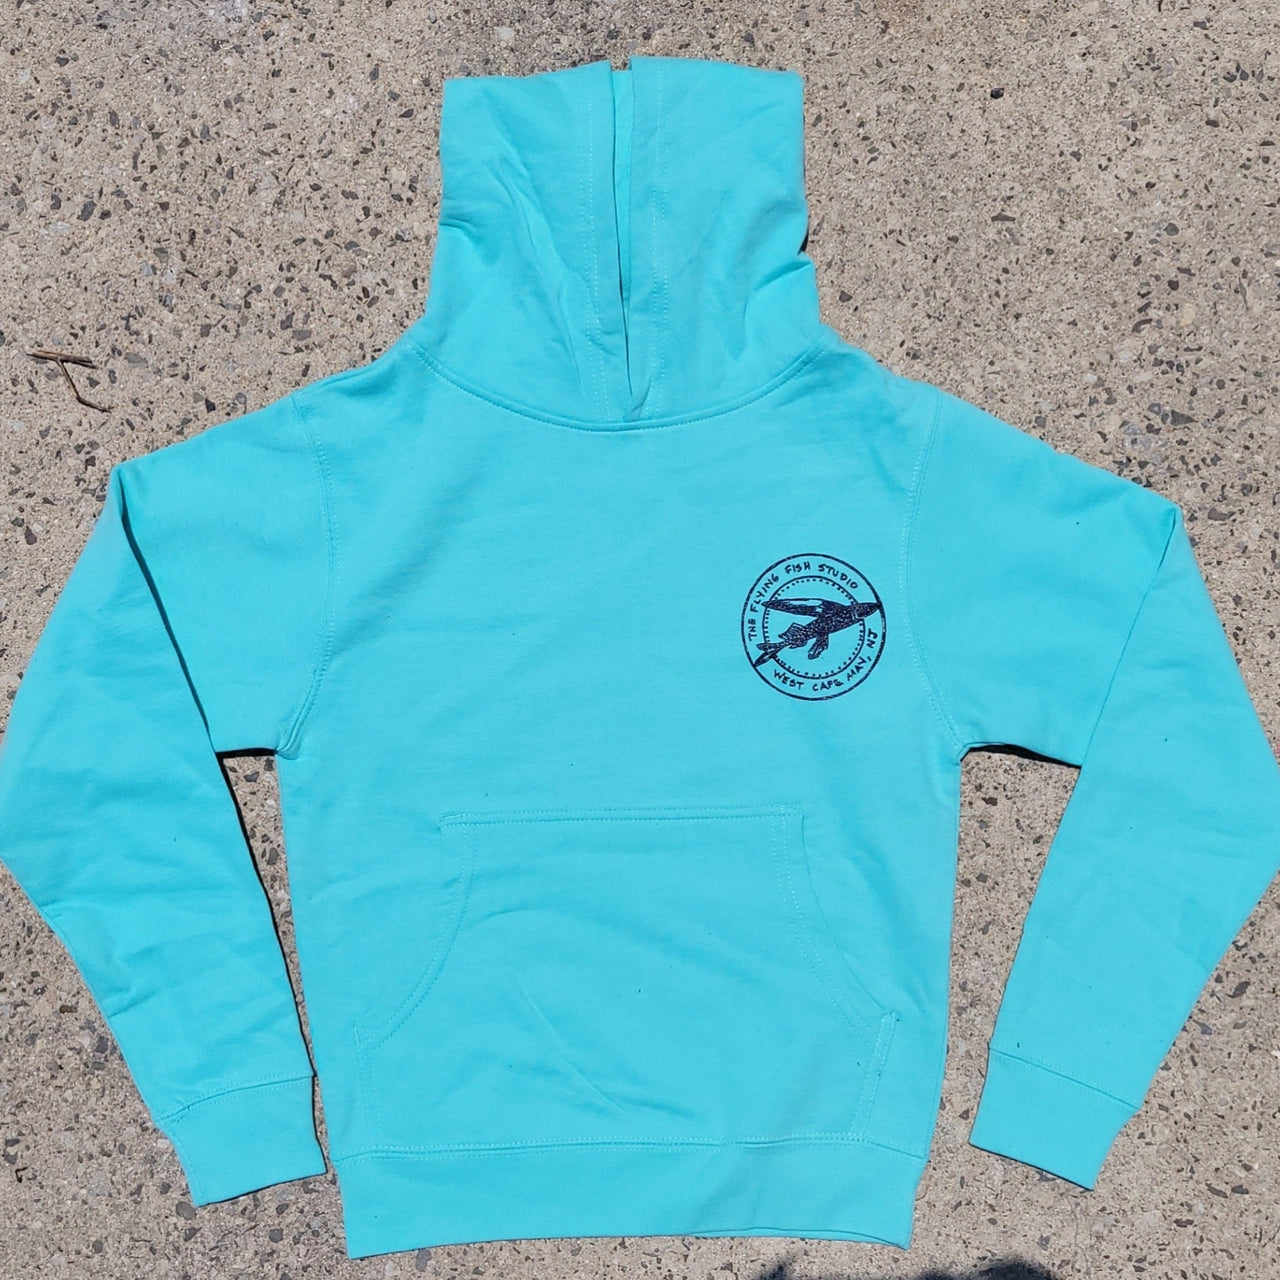 Aqua Blue, pull-over hoodie featuring the 'Flying Fish' logo on the left chest in navy ink.